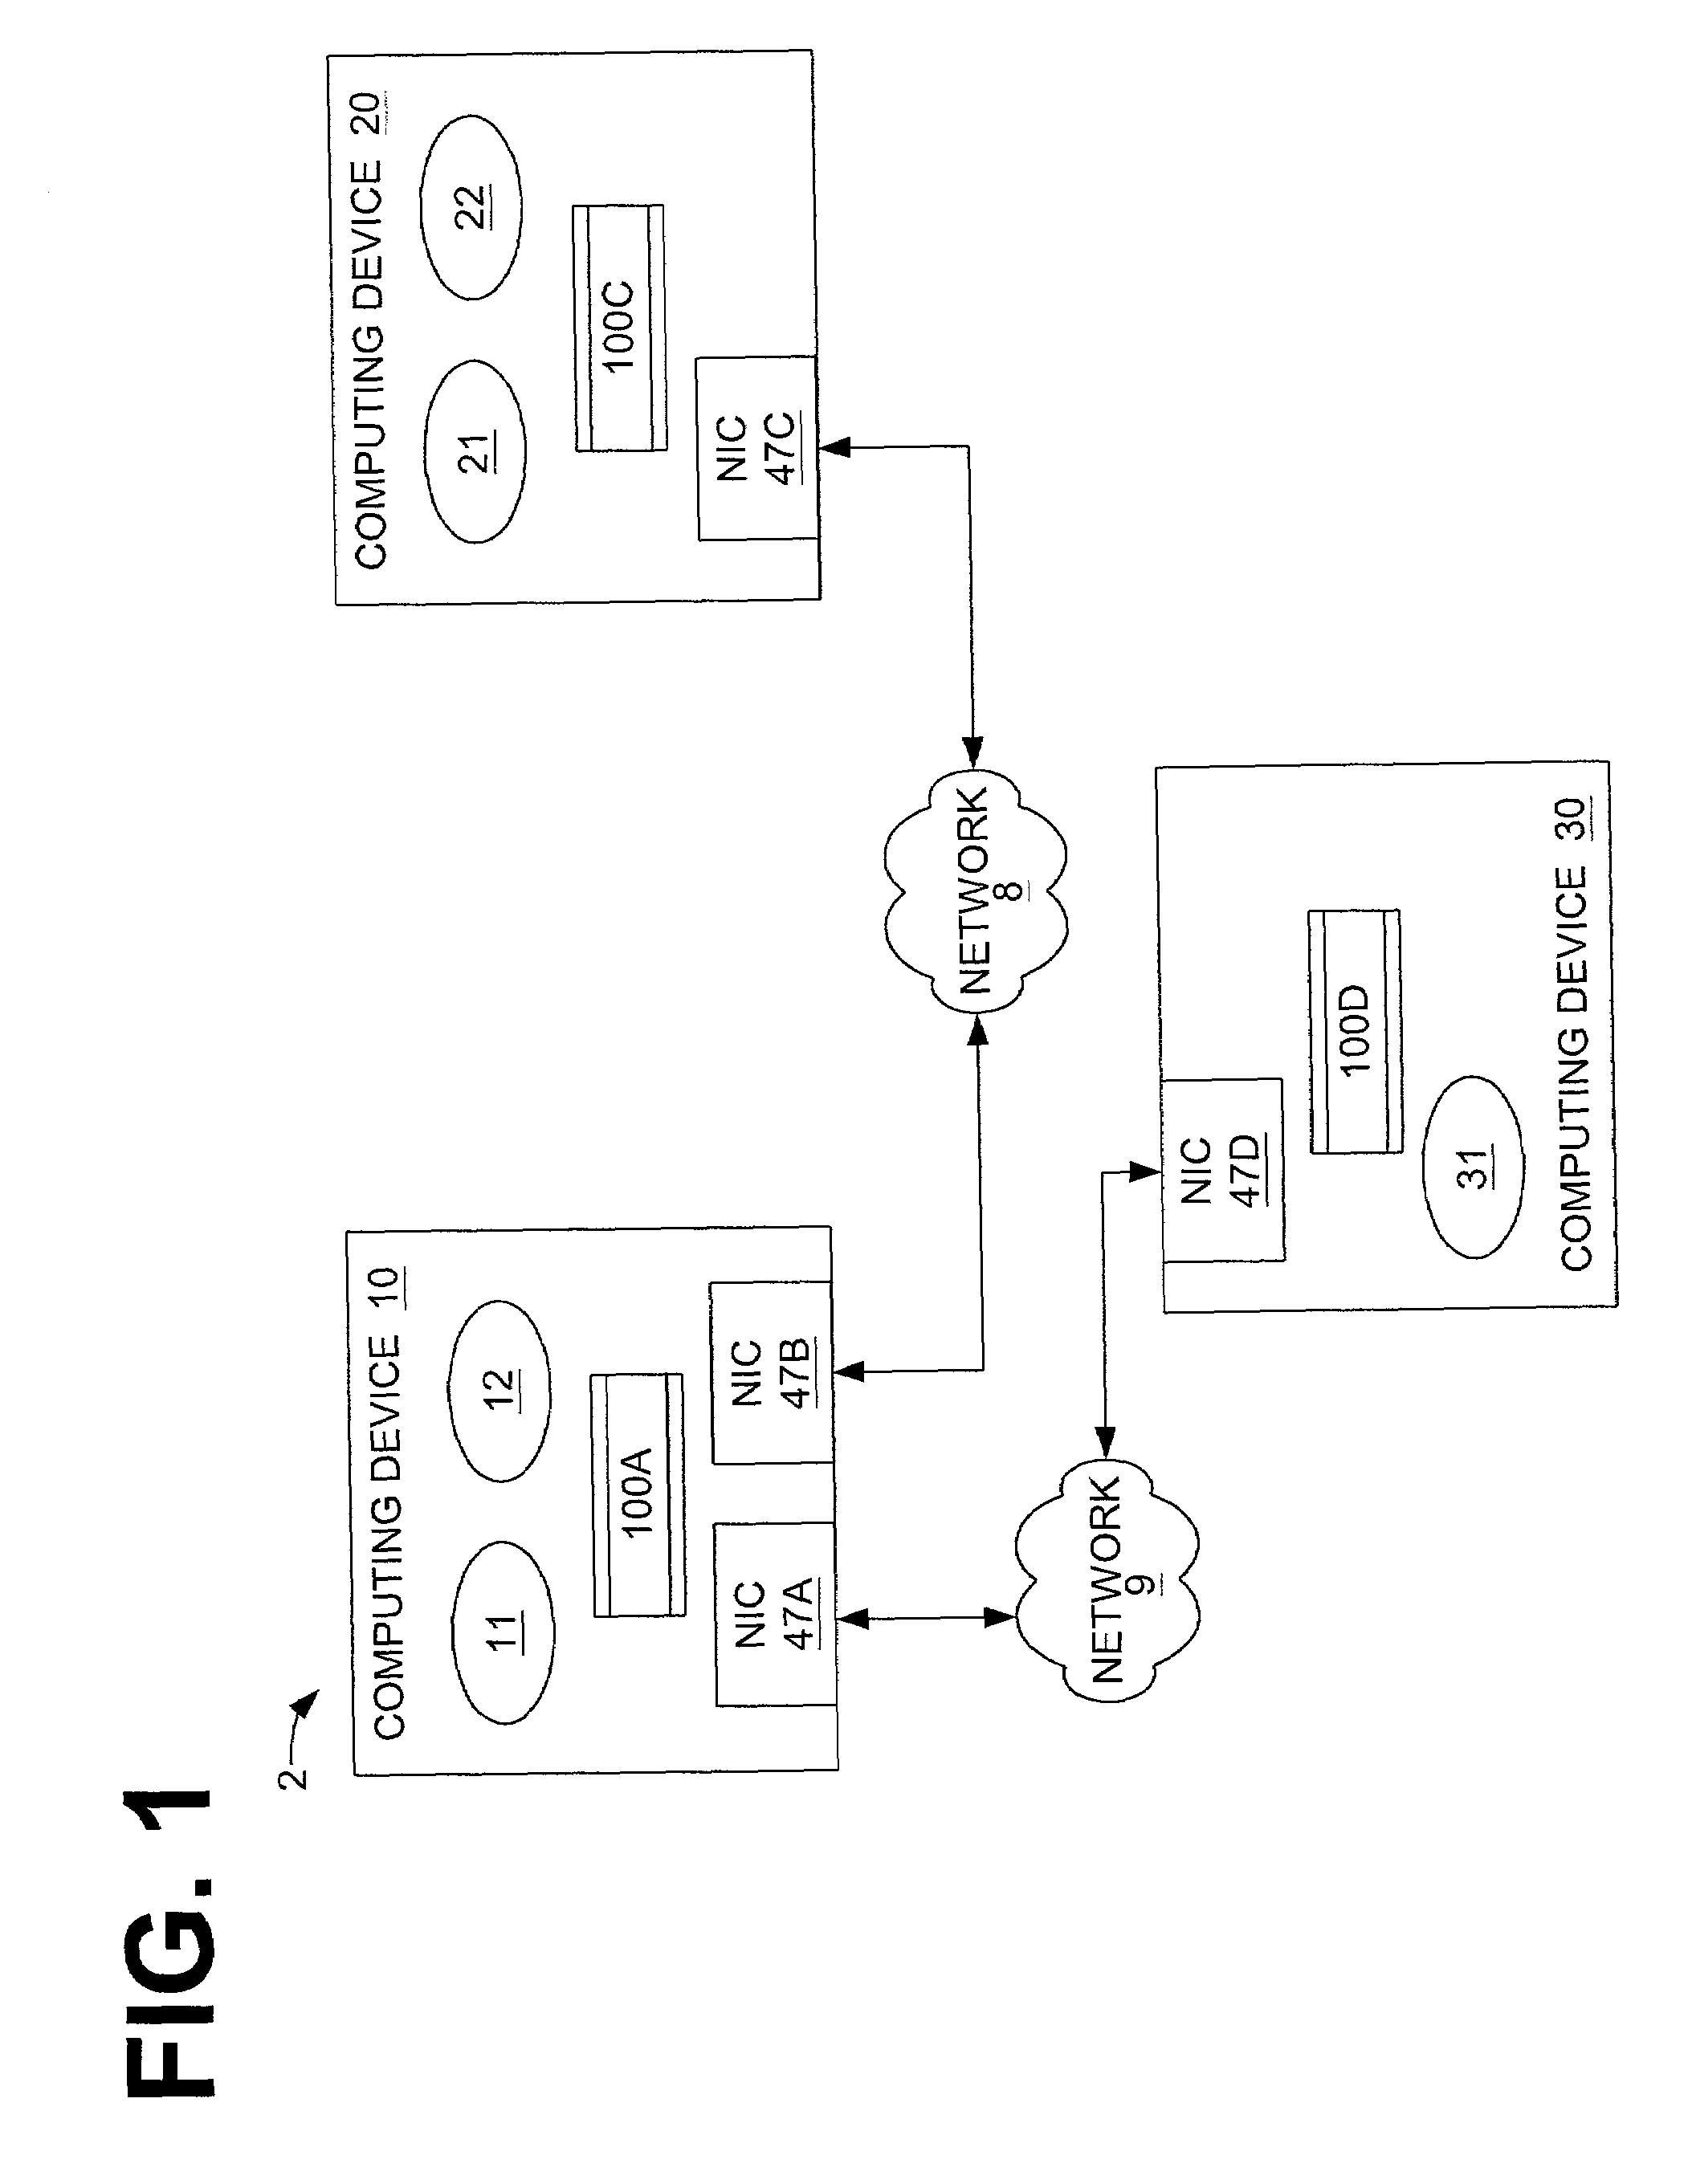 System and method for a group-based network access control for a computer